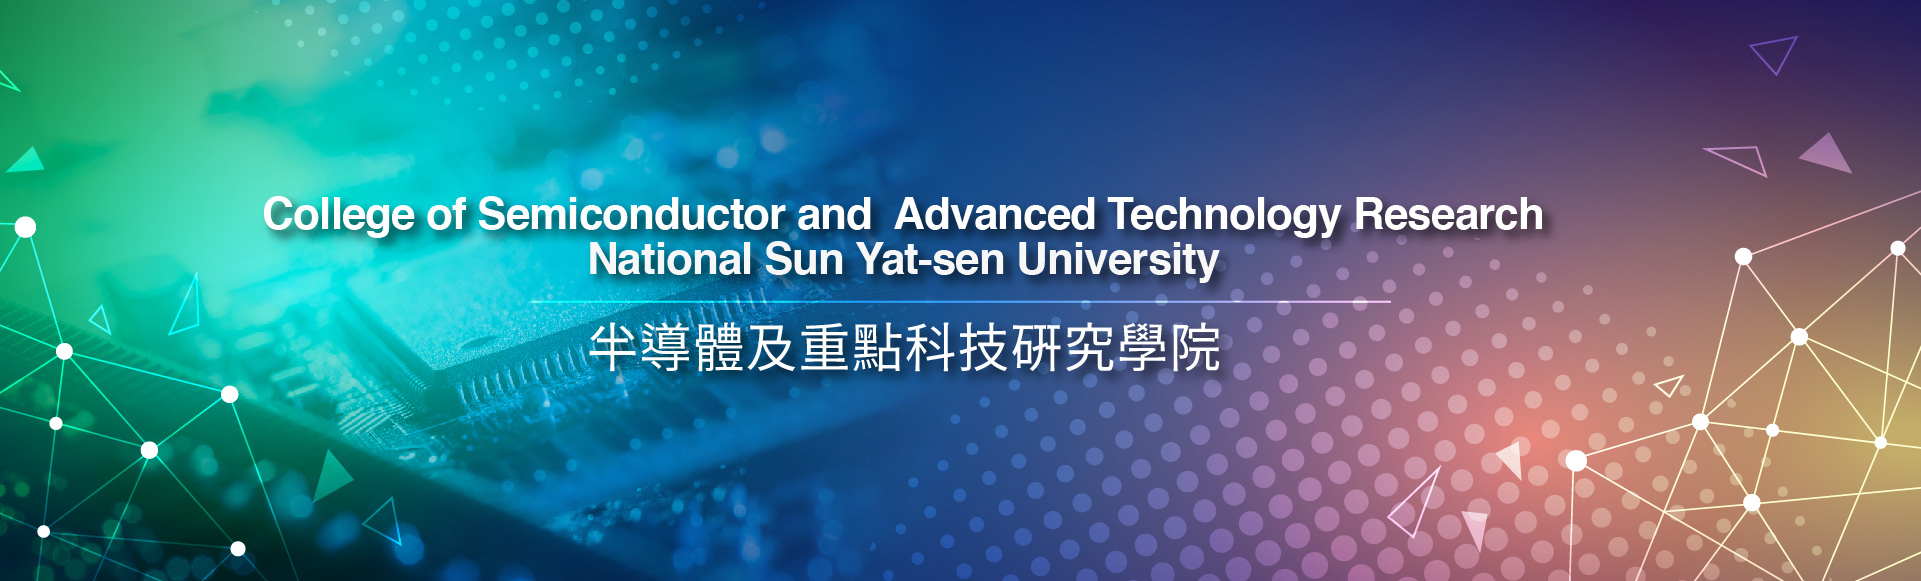 College of Semiconductor and Advanced Technology Research